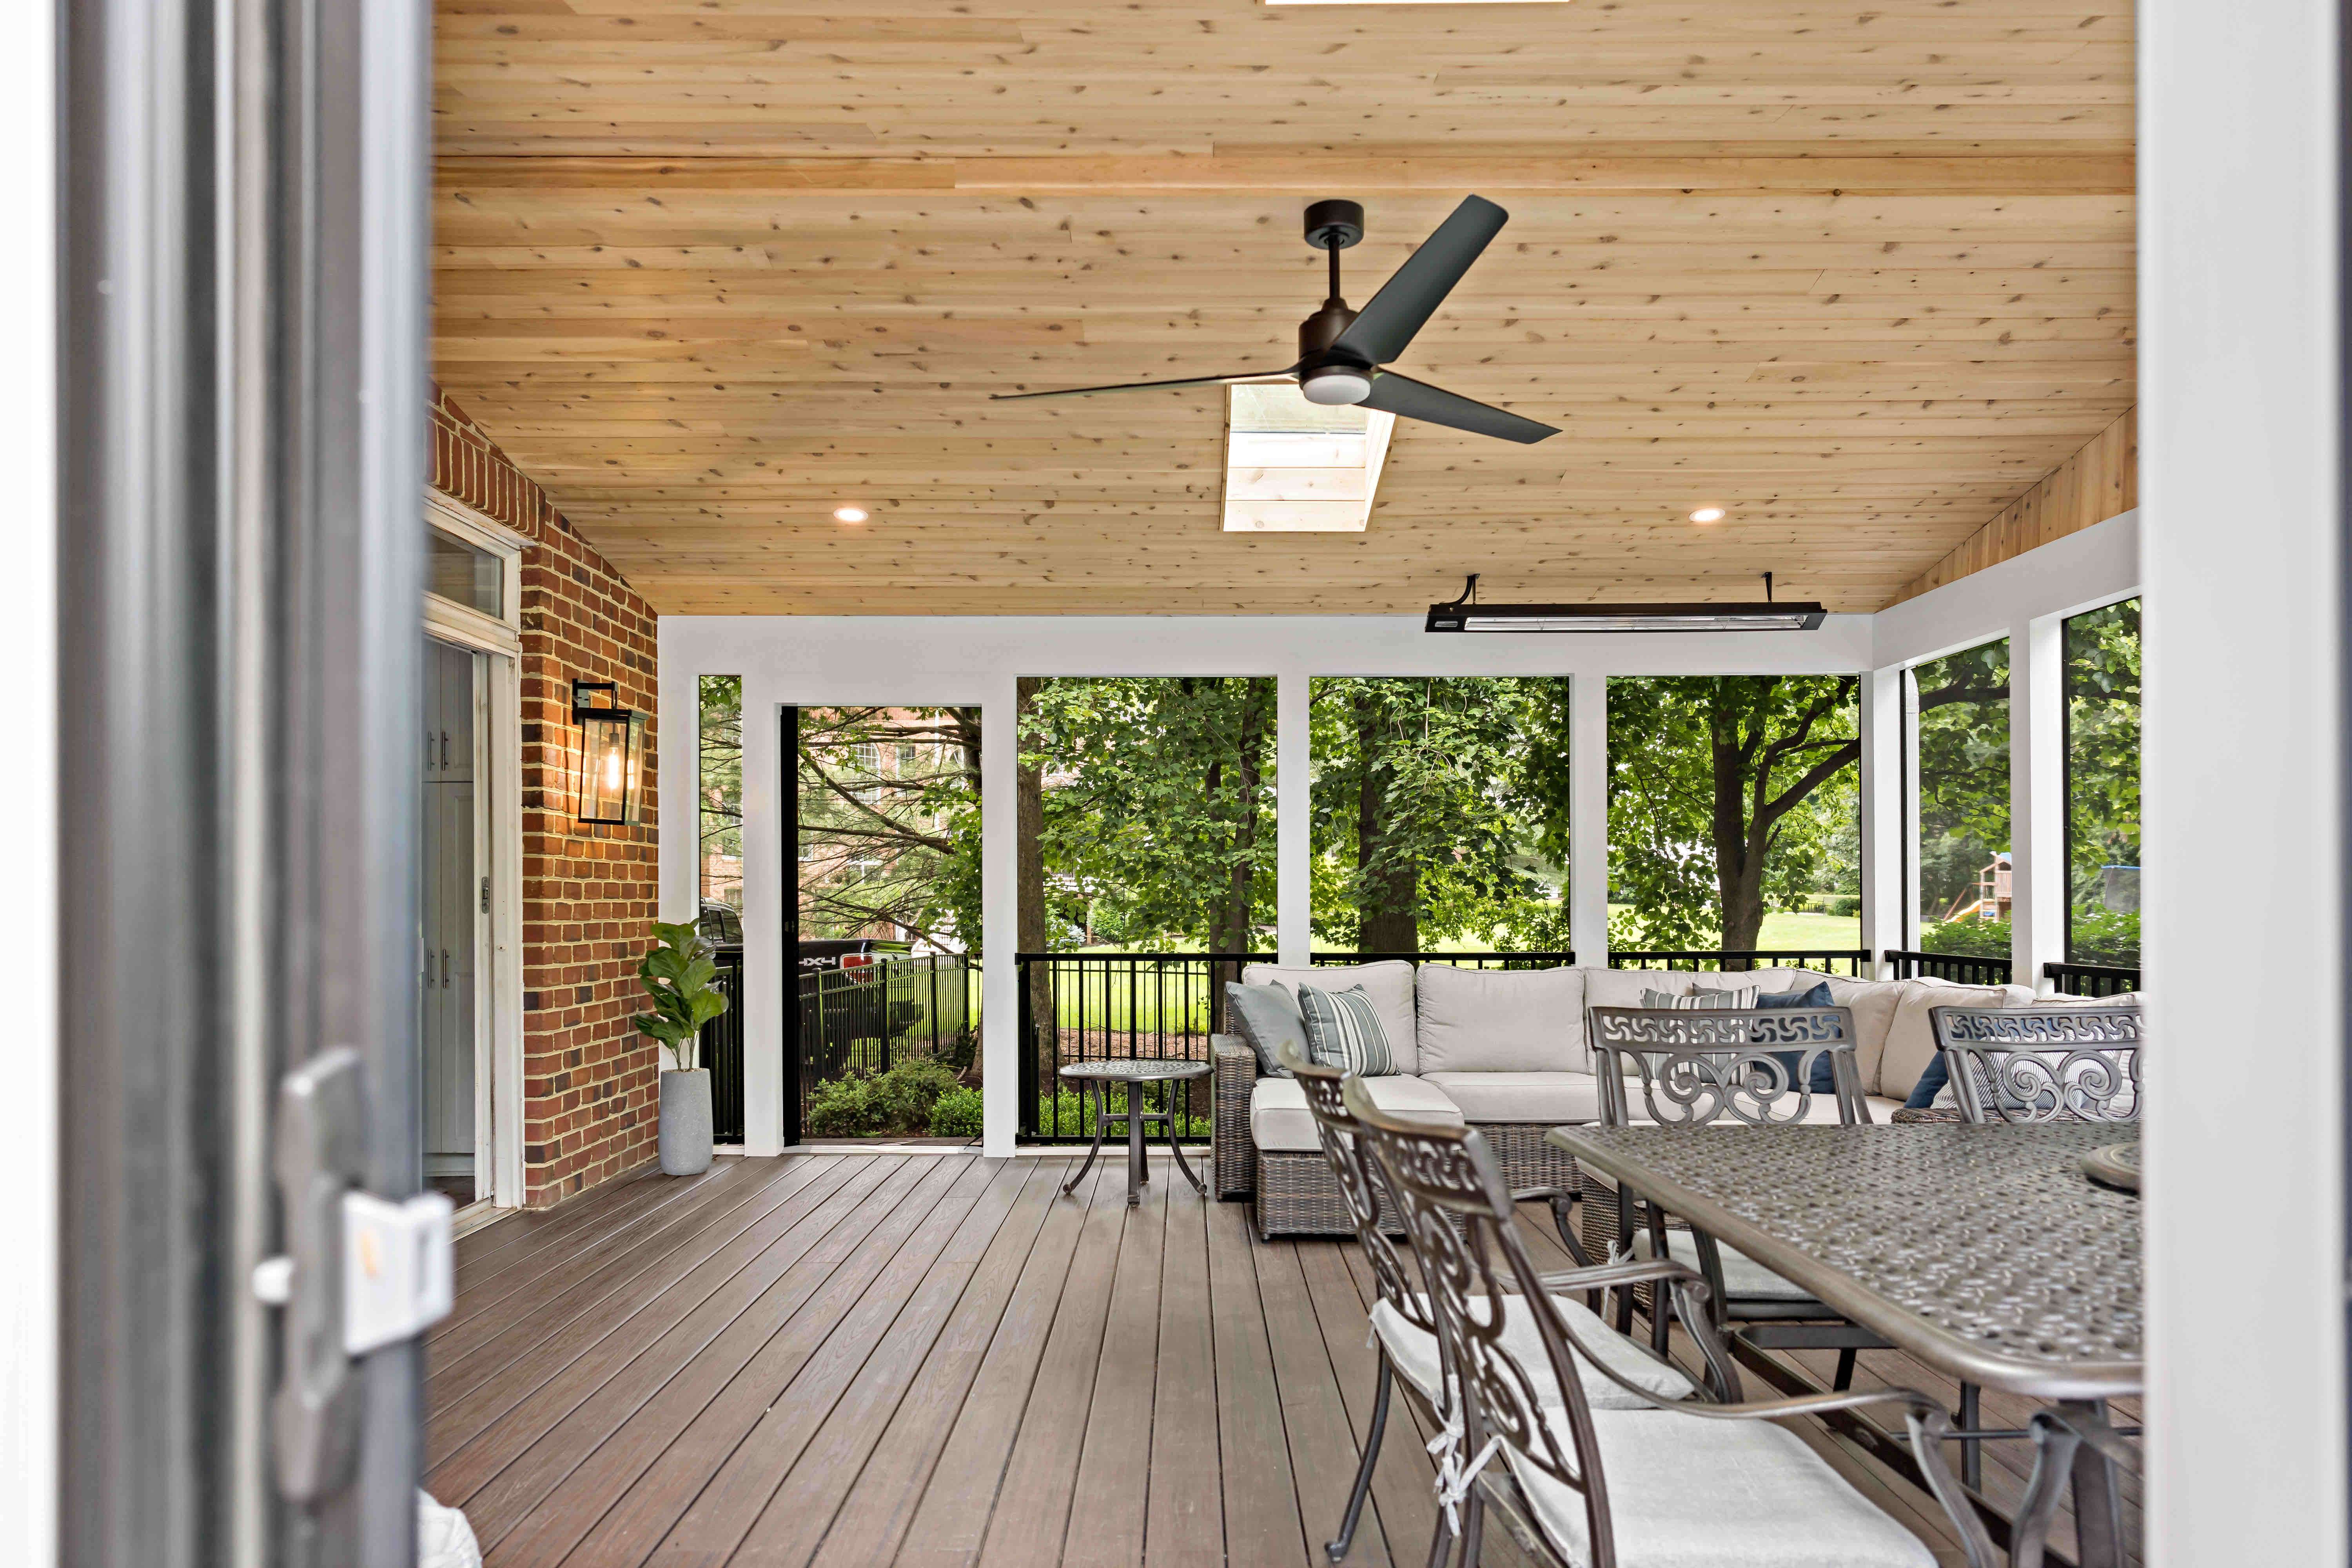 Screened porch with wood paneling vaulted ceiling